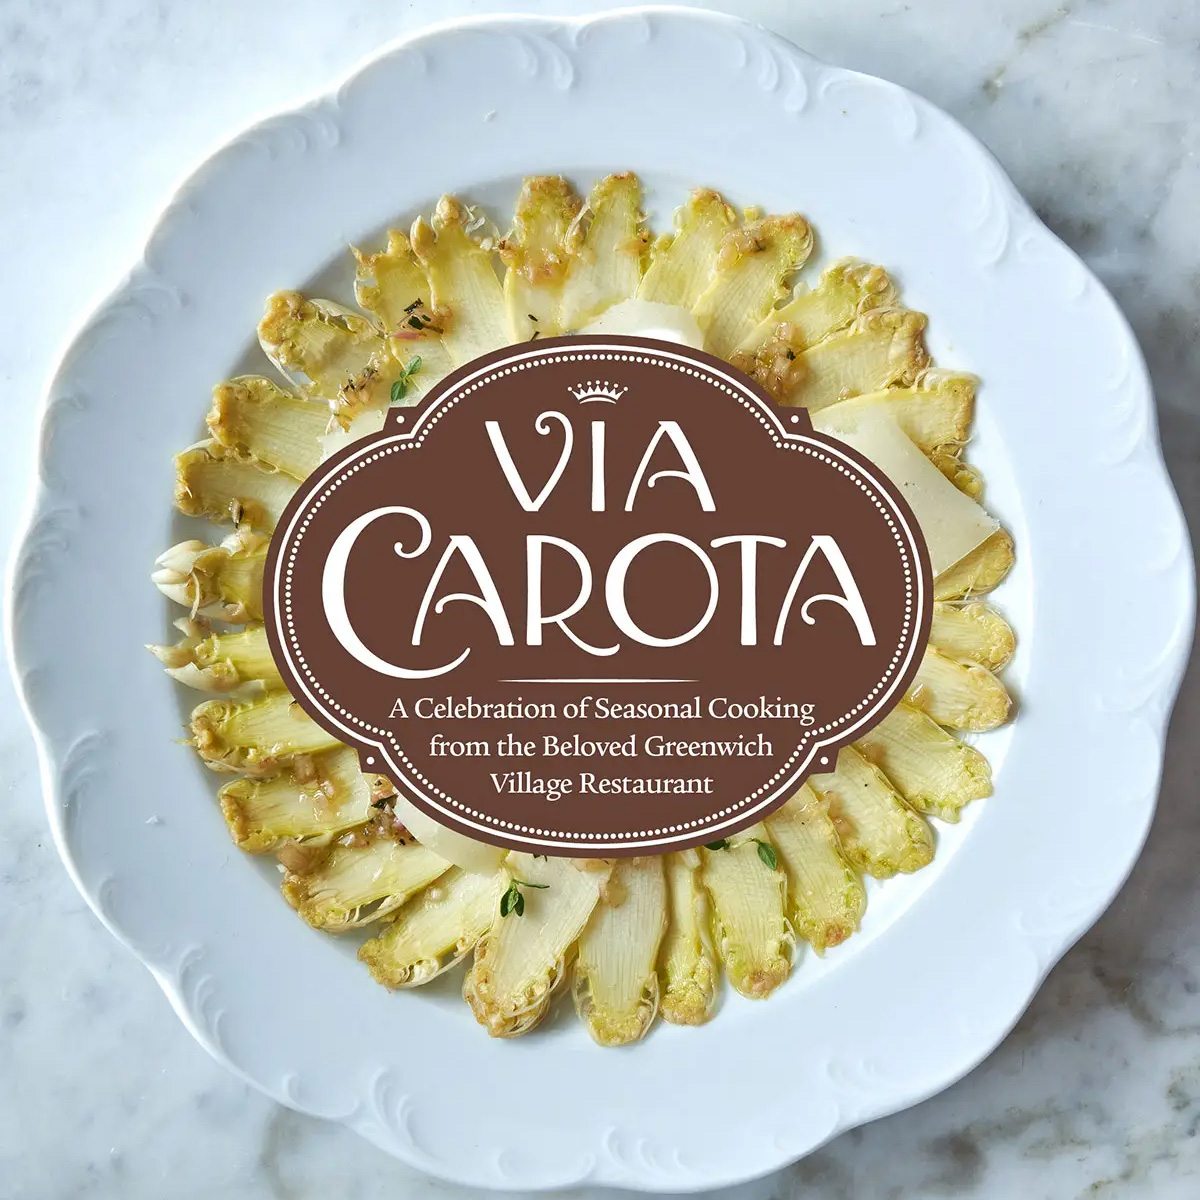 Why Everybody’s Talking About the New Via Carota Cookbook